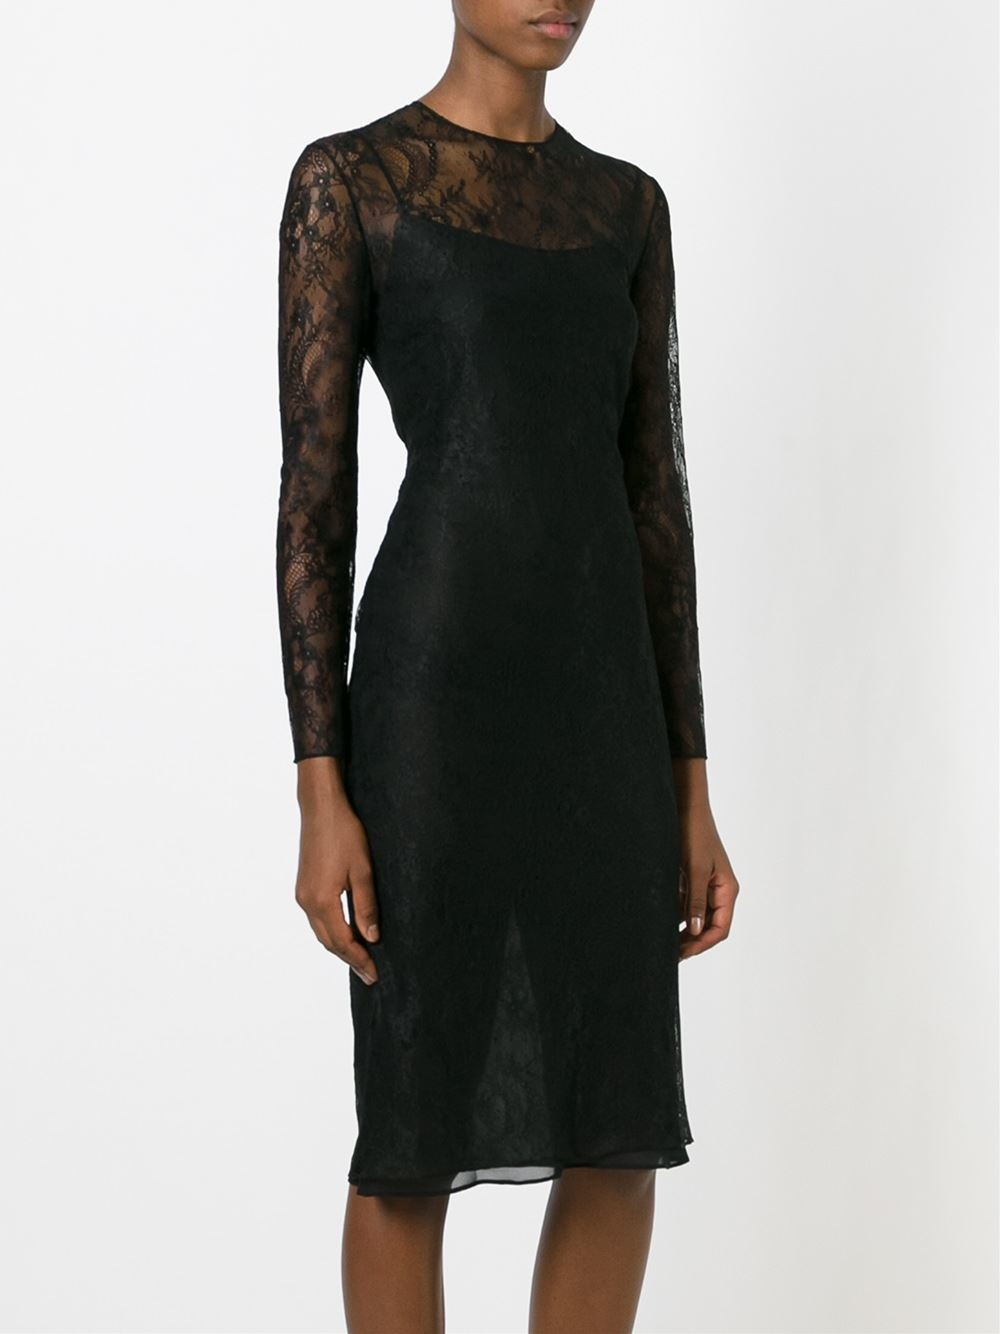 Givenchy Fitted Floral Lace Dress in Black | Lyst